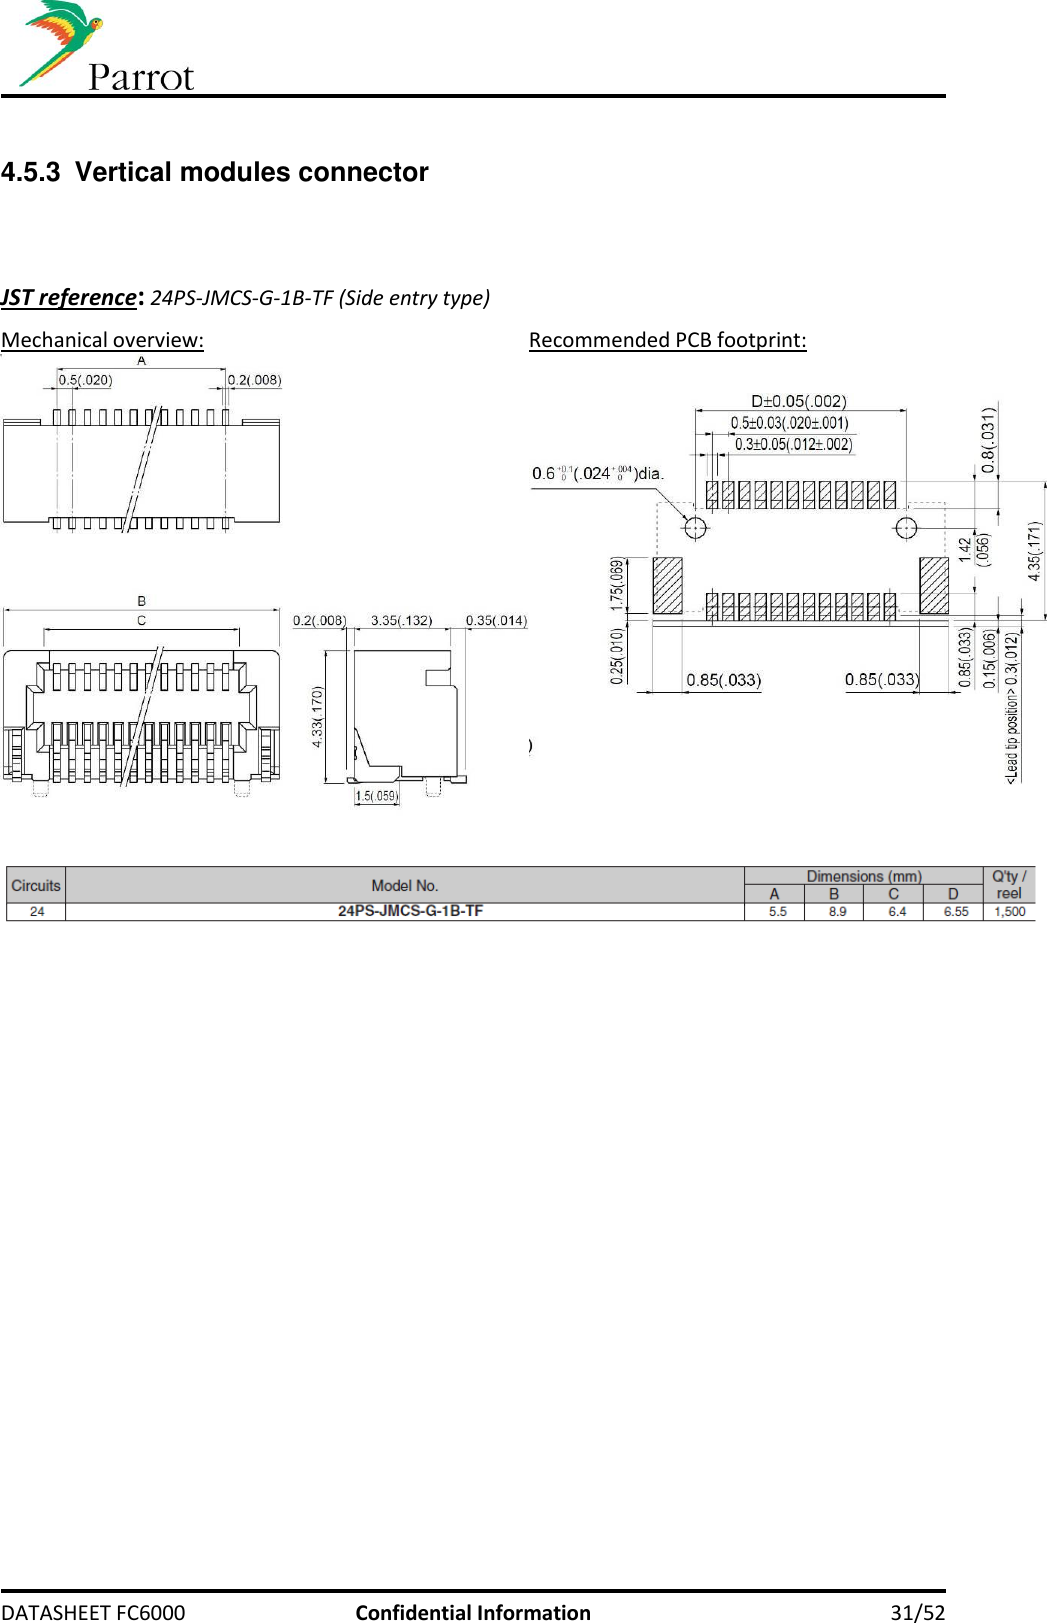     DATASHEET FC6000  Confidential Information 31/52  4.5.3 Vertical modules connector    JST reference: 24PS-JMCS-G-1B-TF (Side entry type) Mechanical overview: Recommended PCB footprint:      